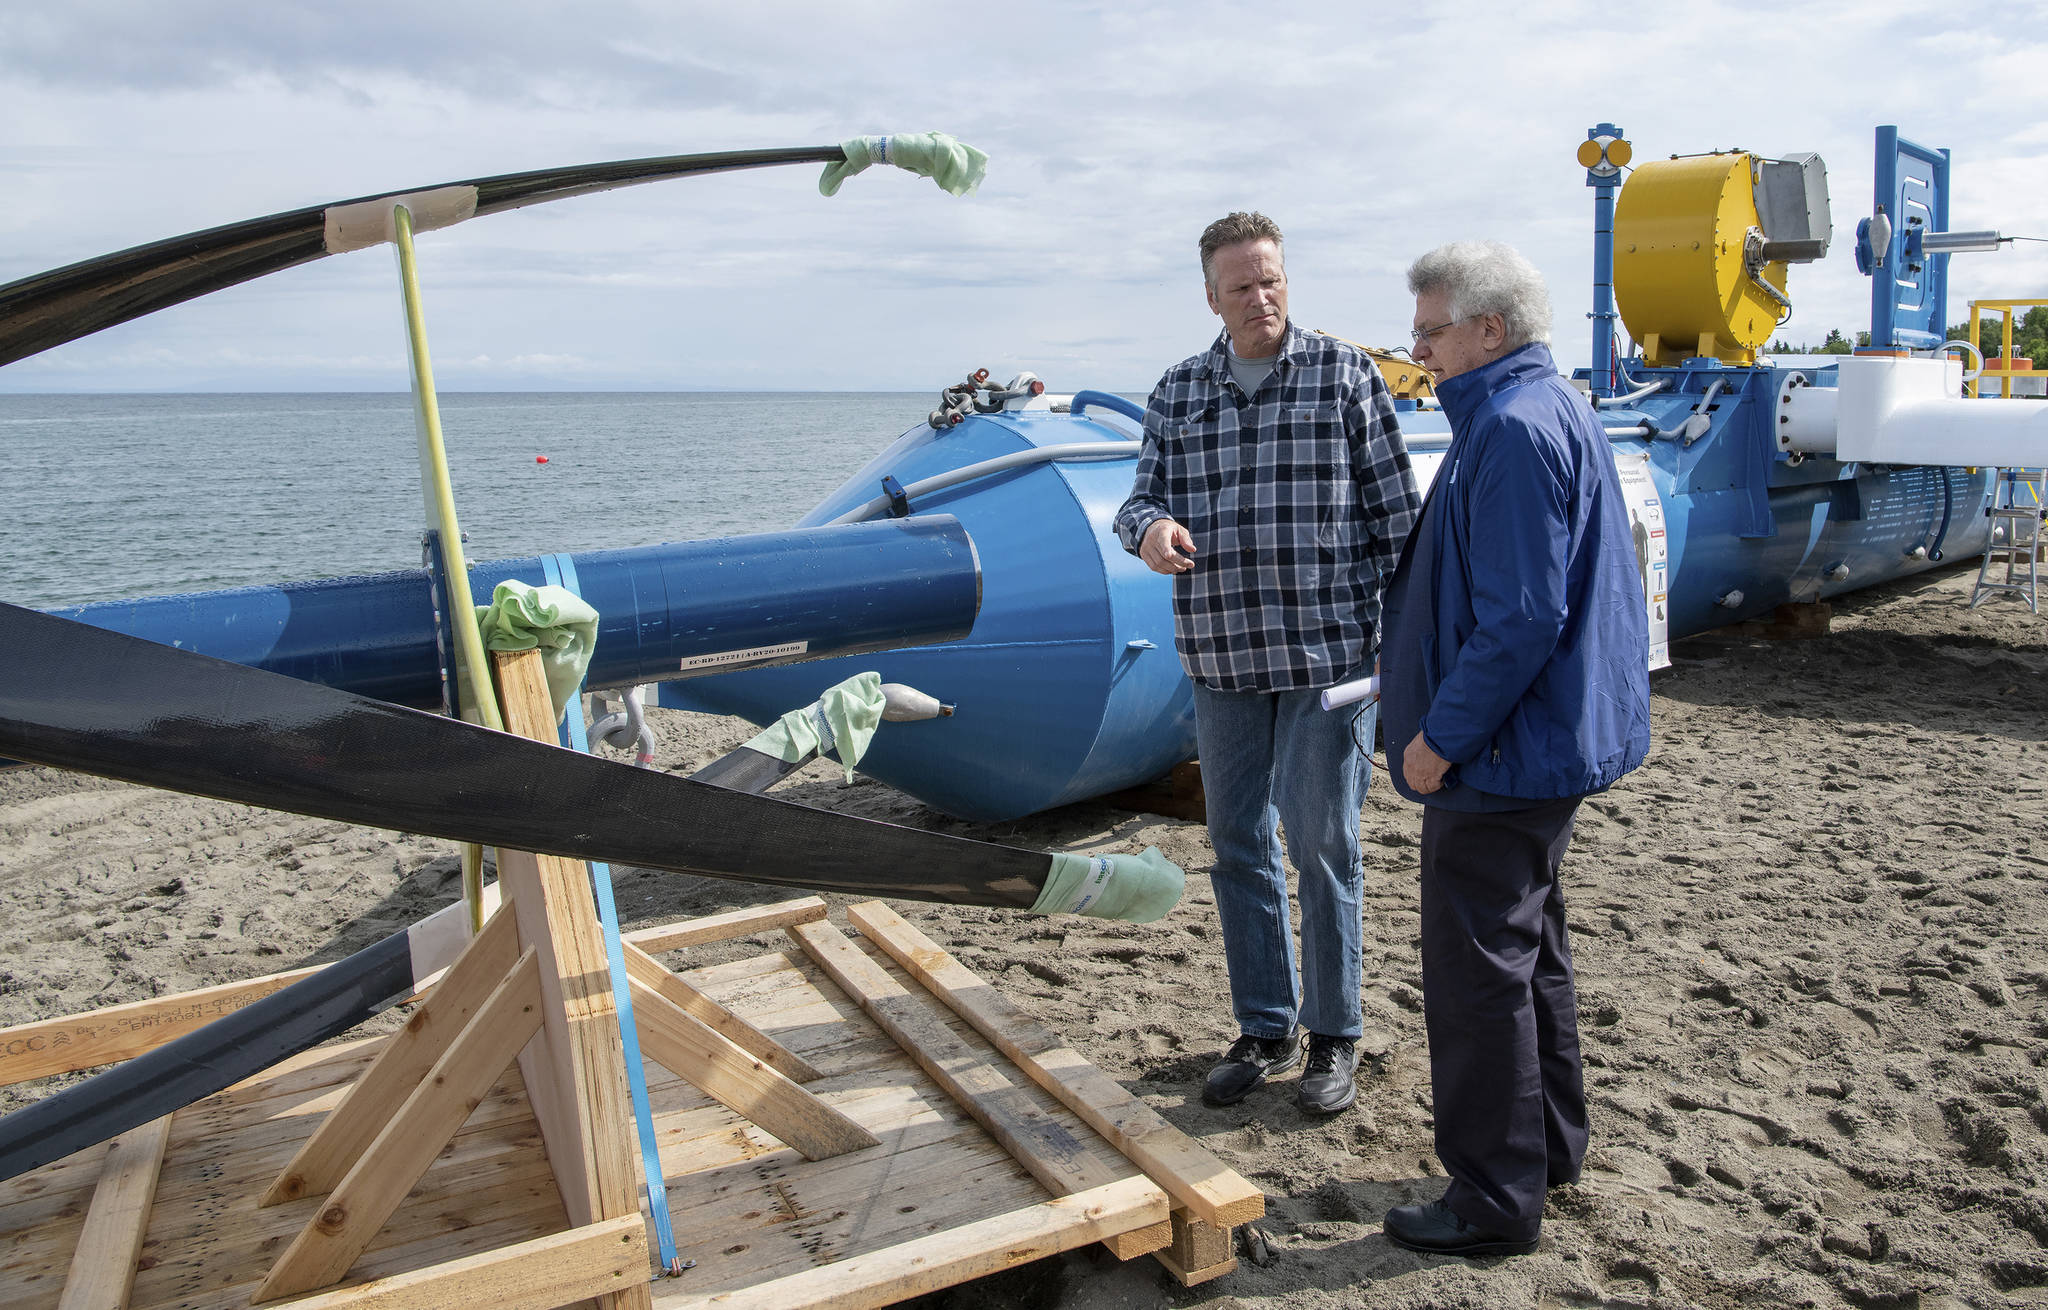 In this Tuesday, July 16, 2019, photo released by the Alaska Governor’s office, Gov. Mike Dunleavy, left, talks with ORPC CEO, Co-Founder, and Chairman Chris Sauer in front of a Riv-Gen Power System turbine on the bank of the Kvichak River in Igiugig, Alaska. A tiny Alaska Native village is adopting an emerging technology to transform the power of a local river into a renewable energy source. (Austin McDaniel/Alaska Governor’s Office via AP)